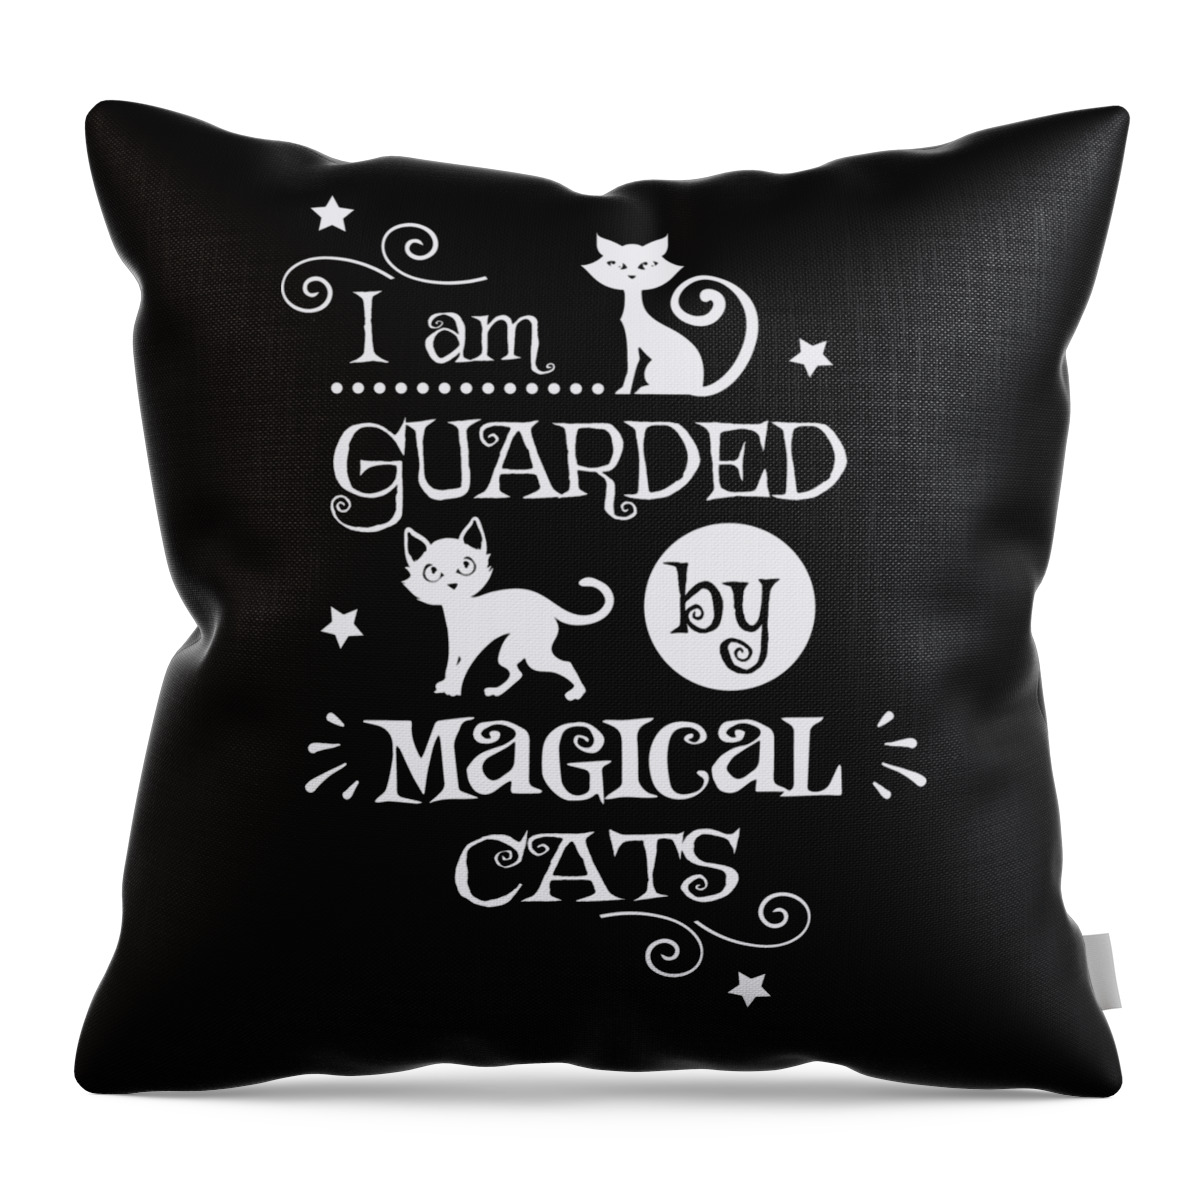 Halloween Throw Pillow featuring the digital art Halloween Decor I am guarded by magical cats by Matthias Hauser